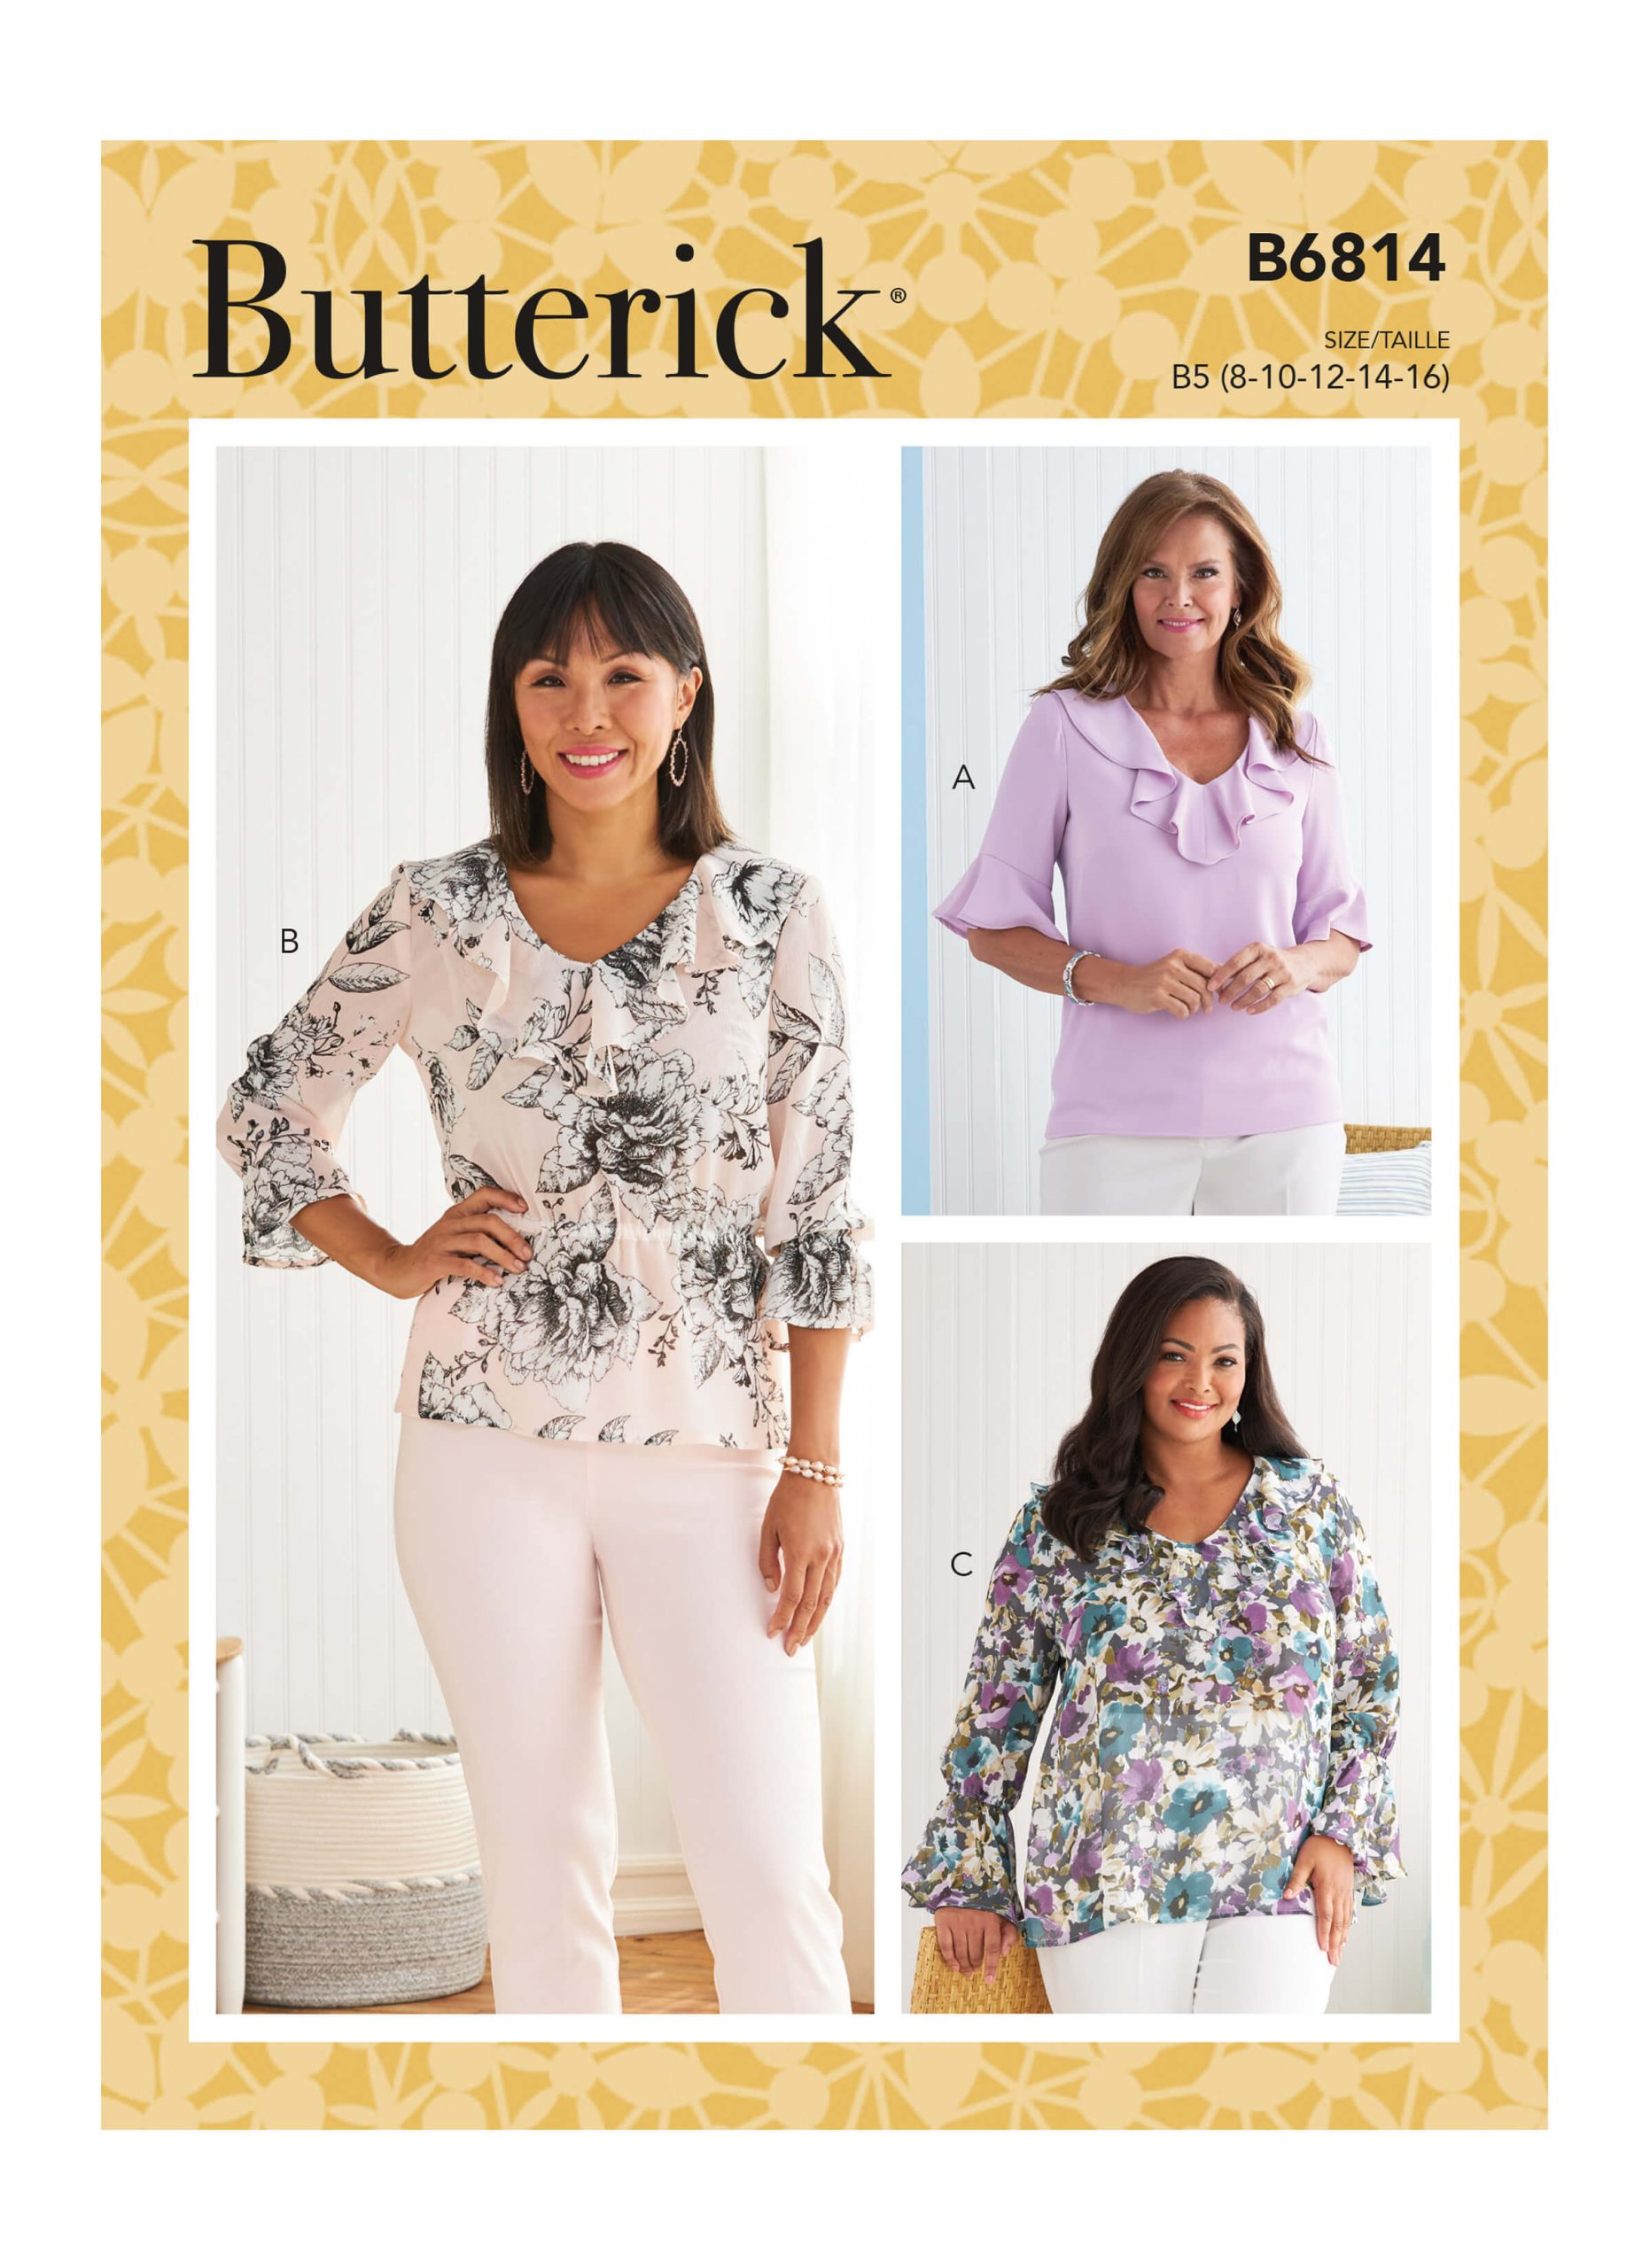 Butterick Sewing Pattern B6814 Misses' and Women's Top